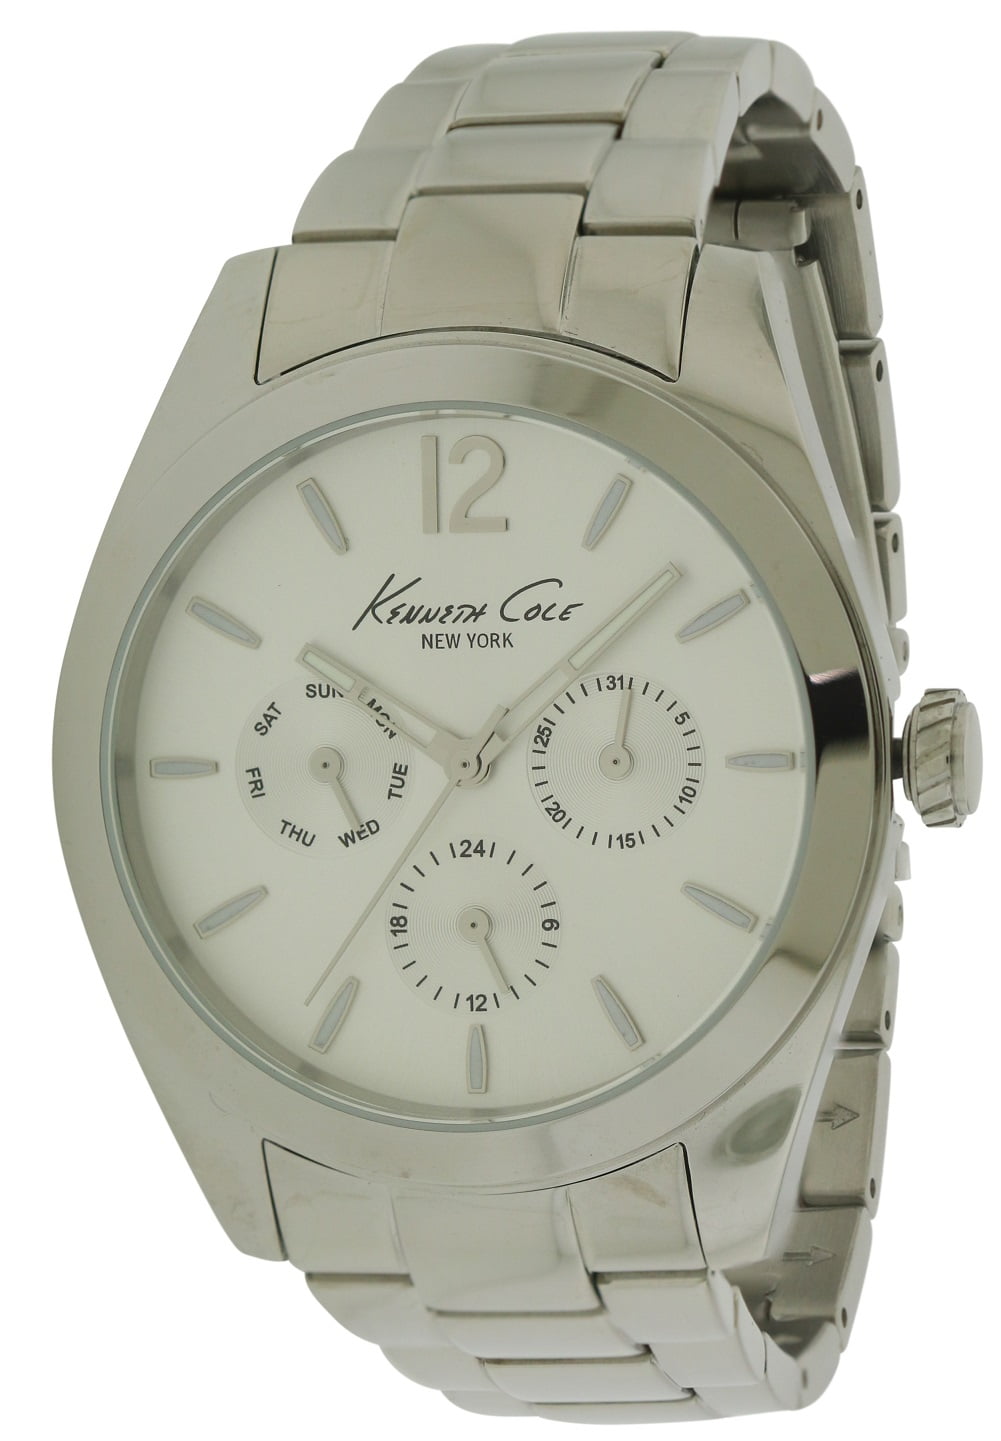 Kenneth Cole - Kenneth Cole Men's New York Stainless Steel Watch Kenneth Cole Stainless Steel Watch